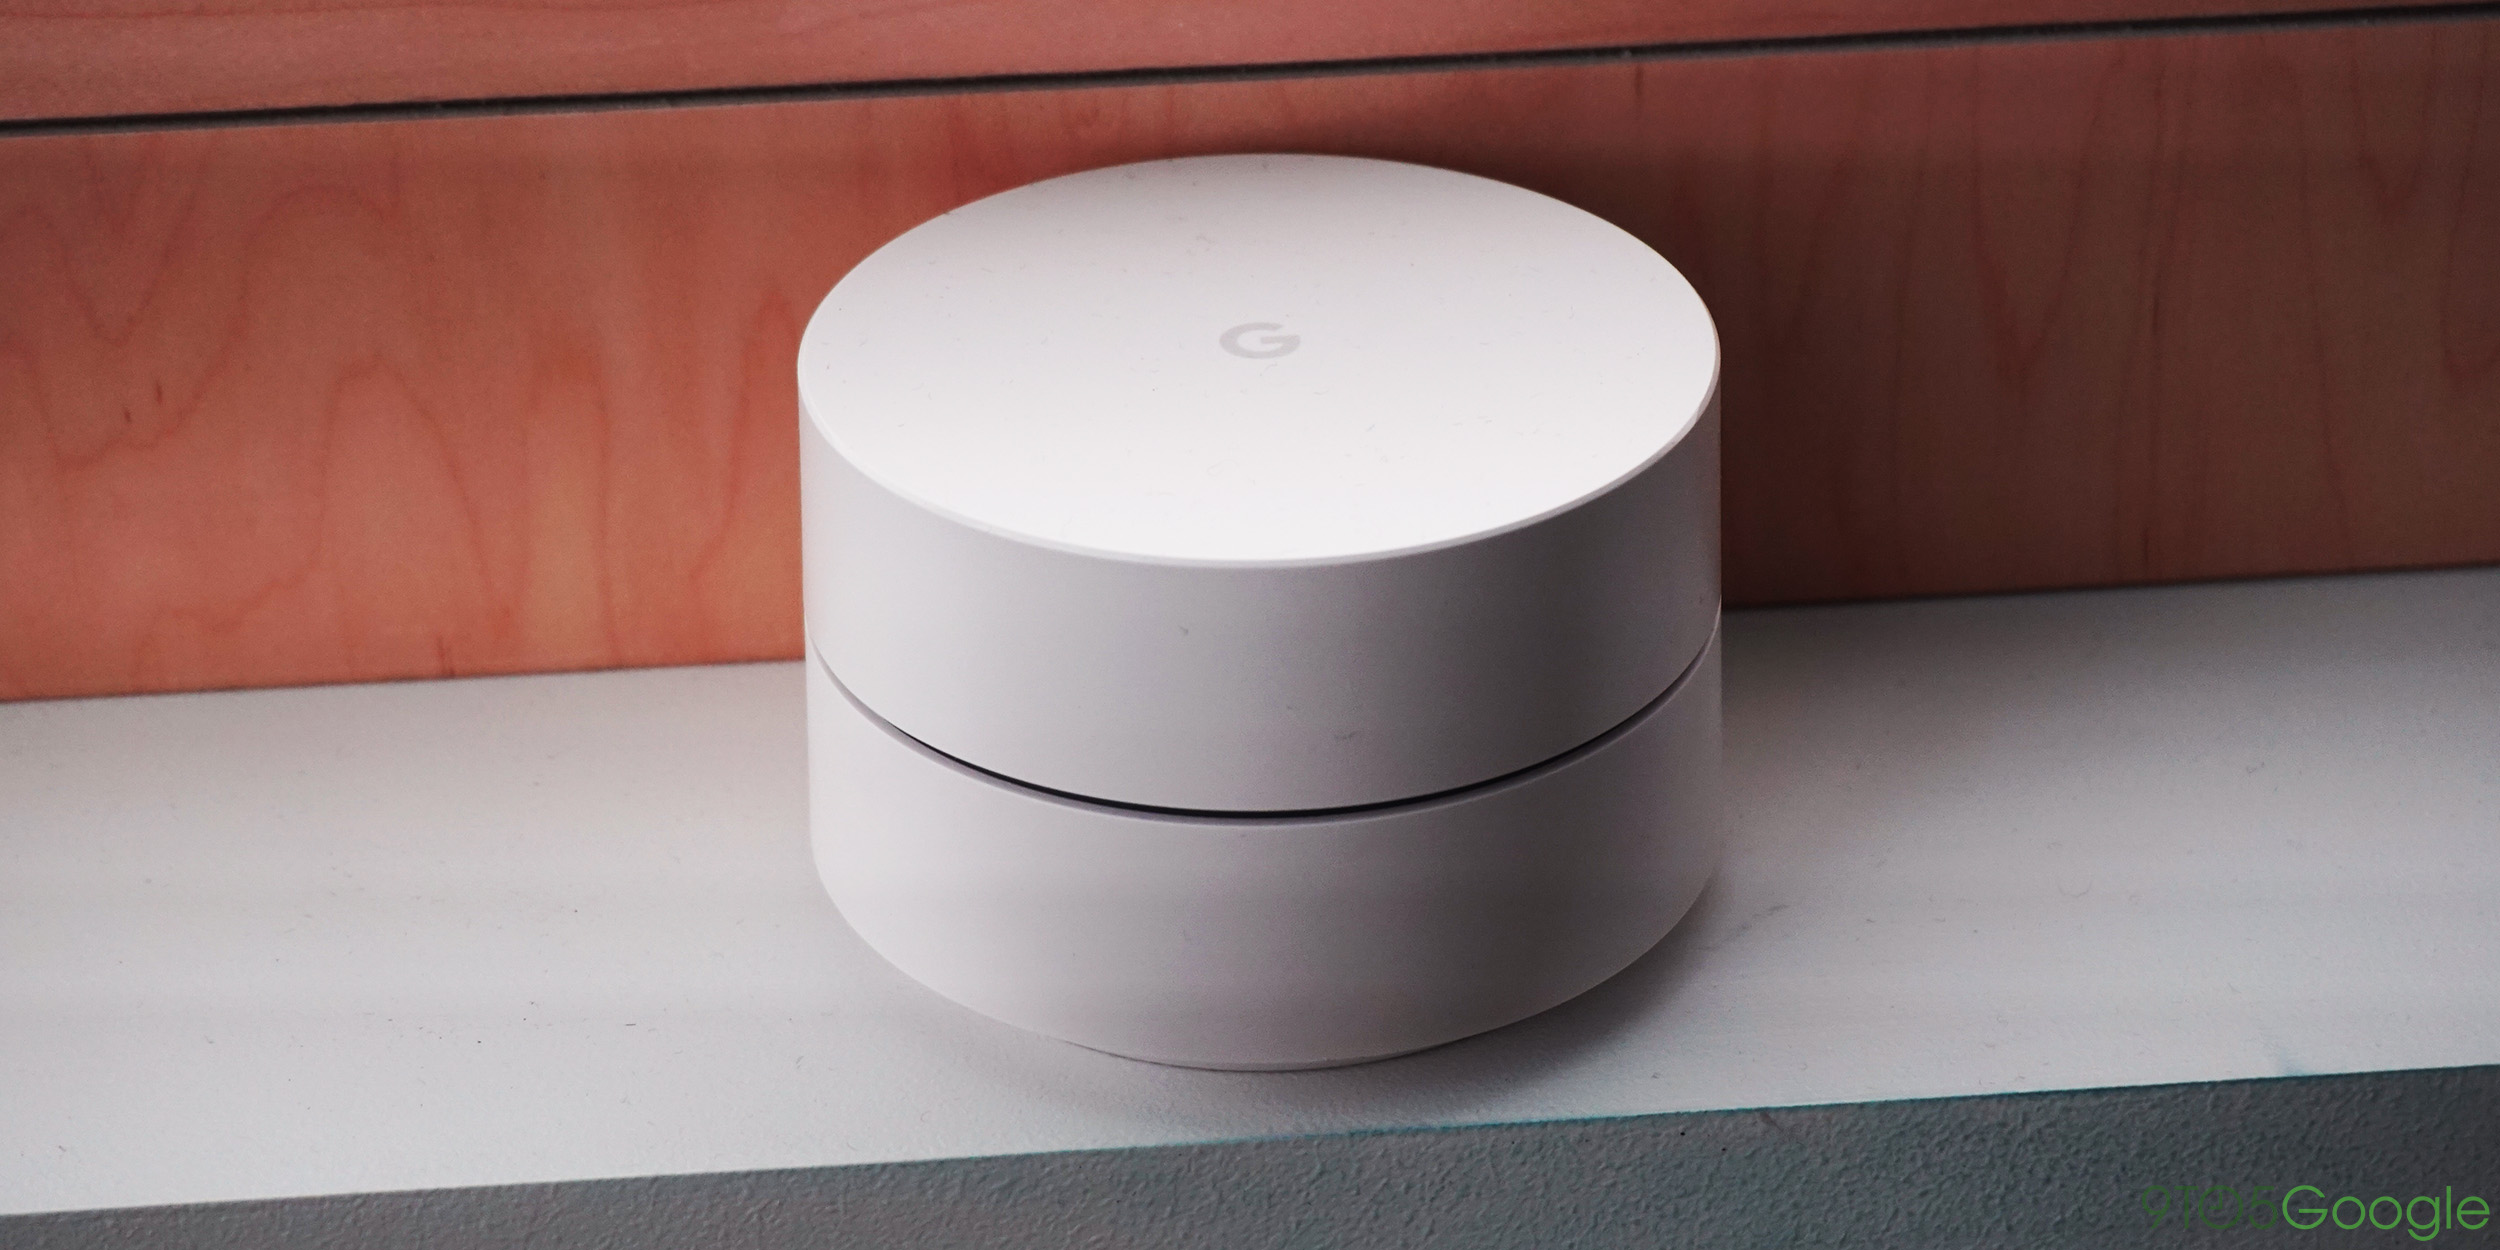 Google Home app will soon let you import Google Wifi networks - 9to5Google